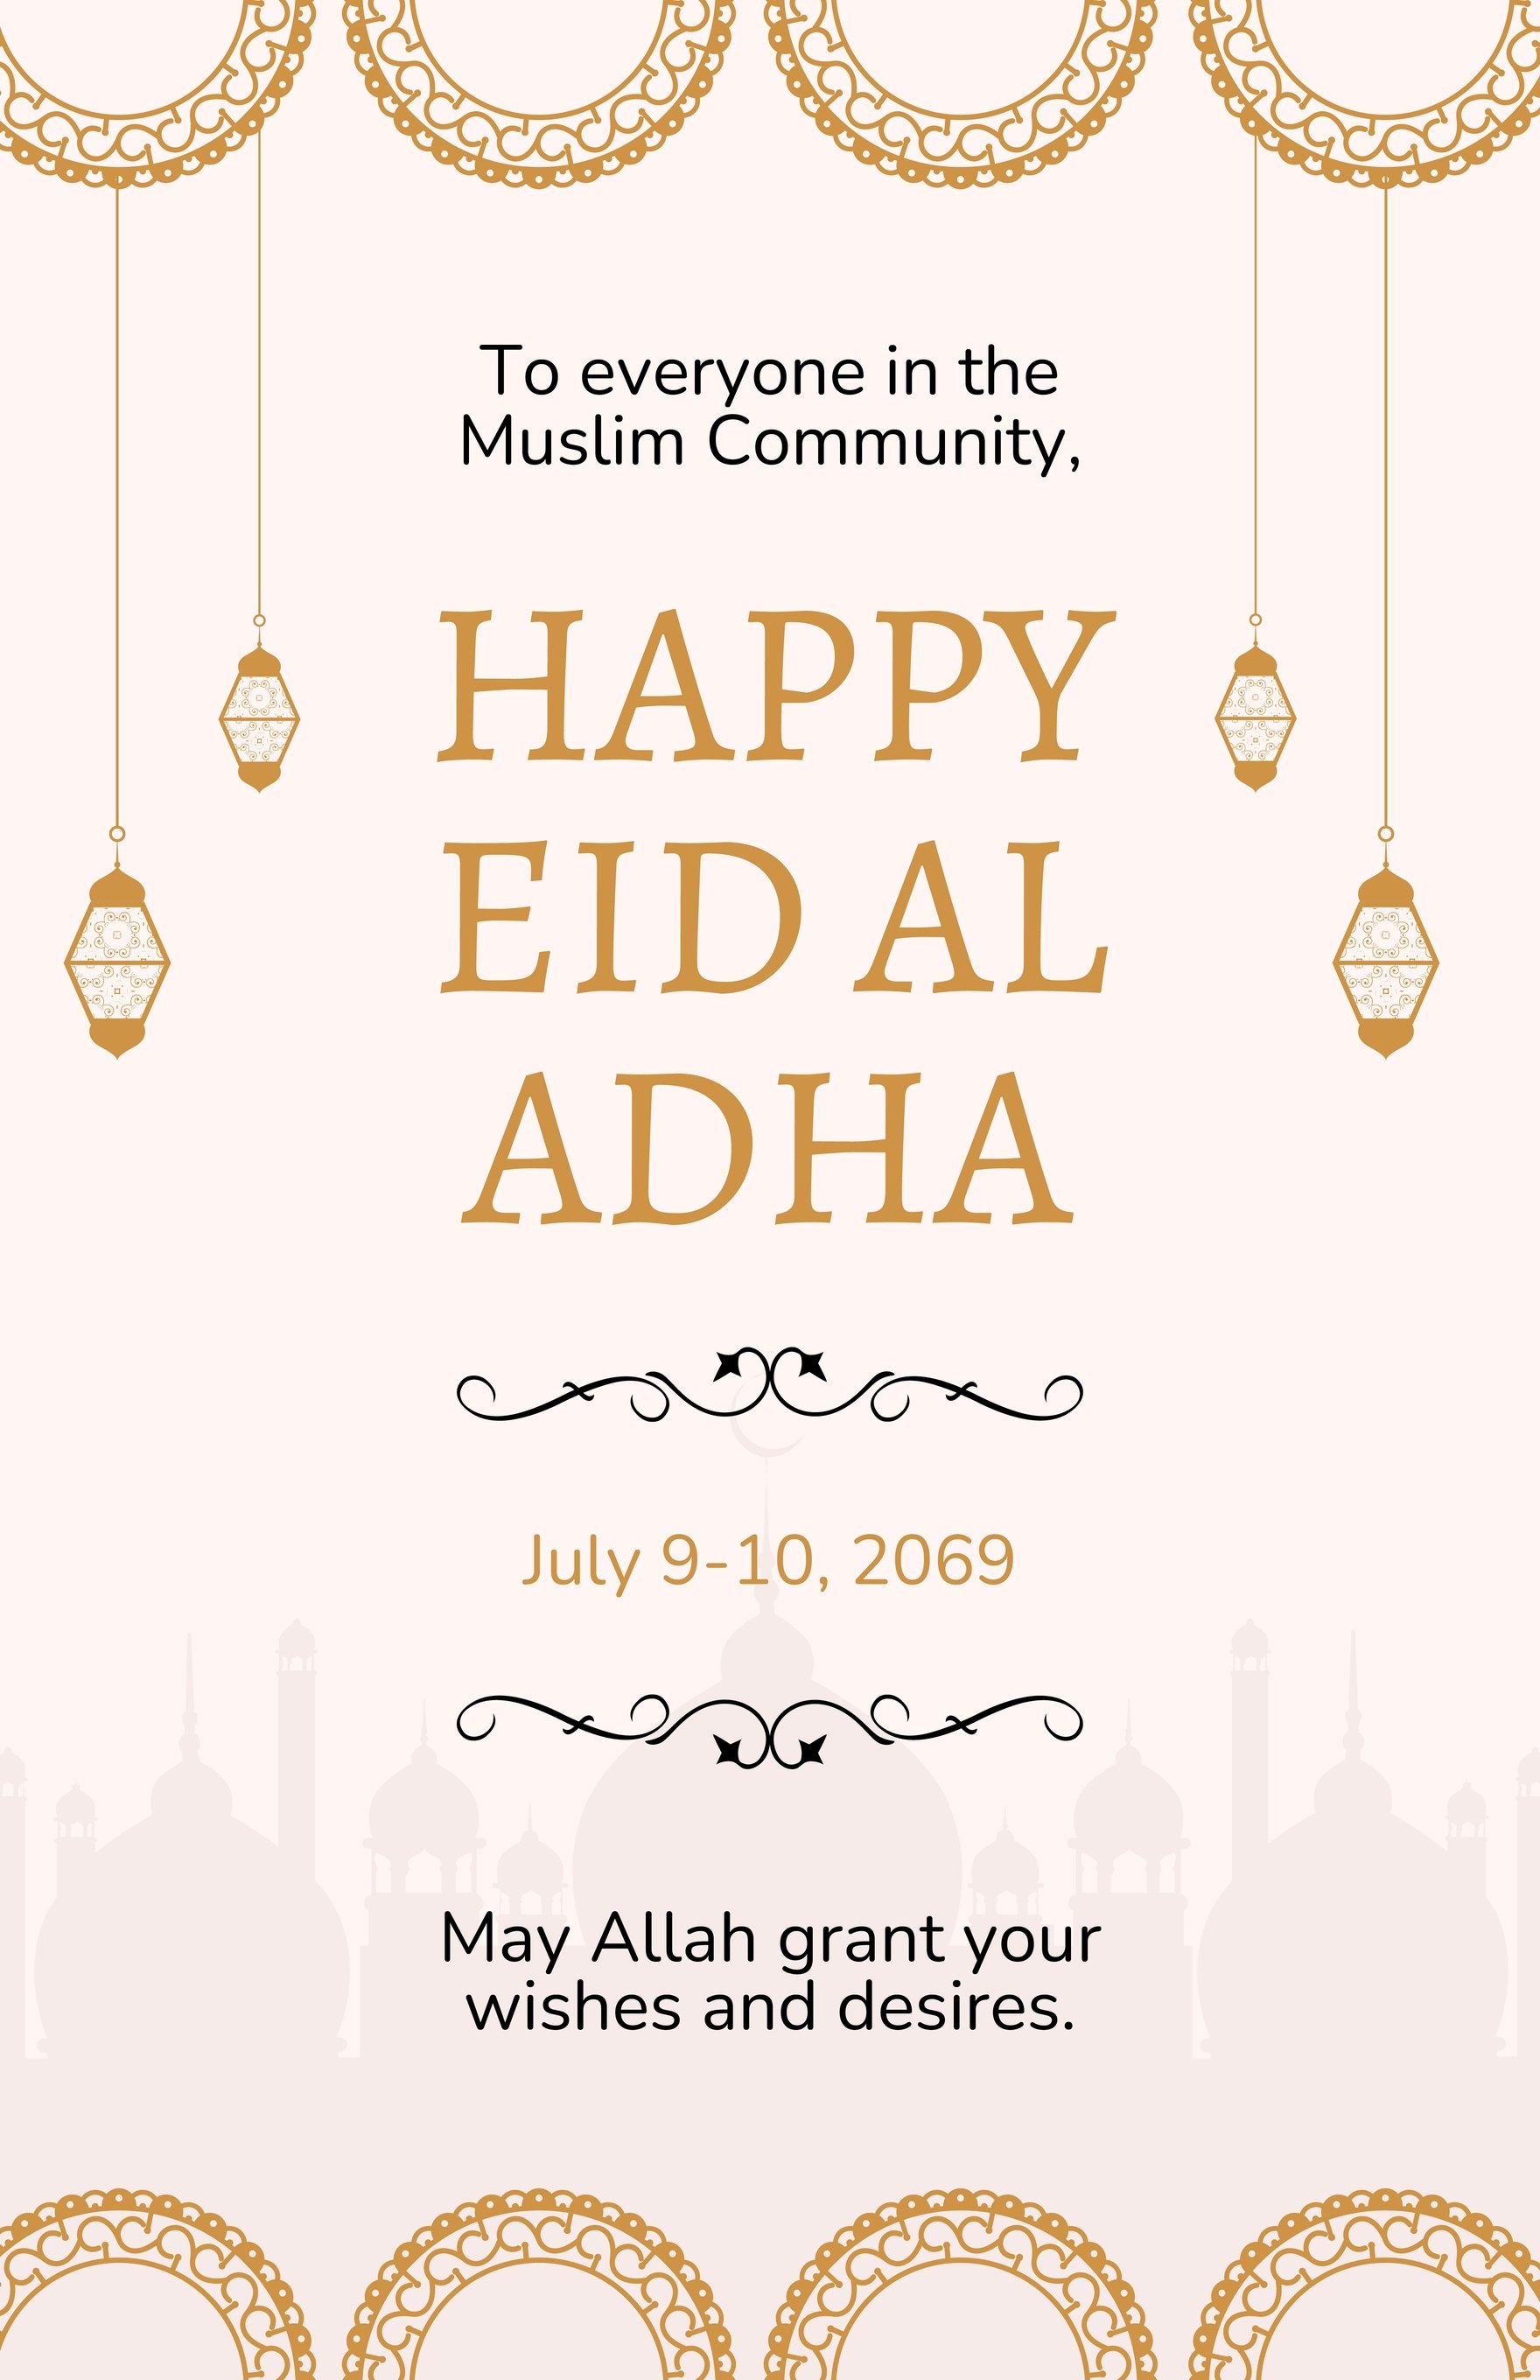 Free Traditional Eid Al Adha Poster in Word, Google Docs, Illustrator, PSD, Apple Pages, Publisher